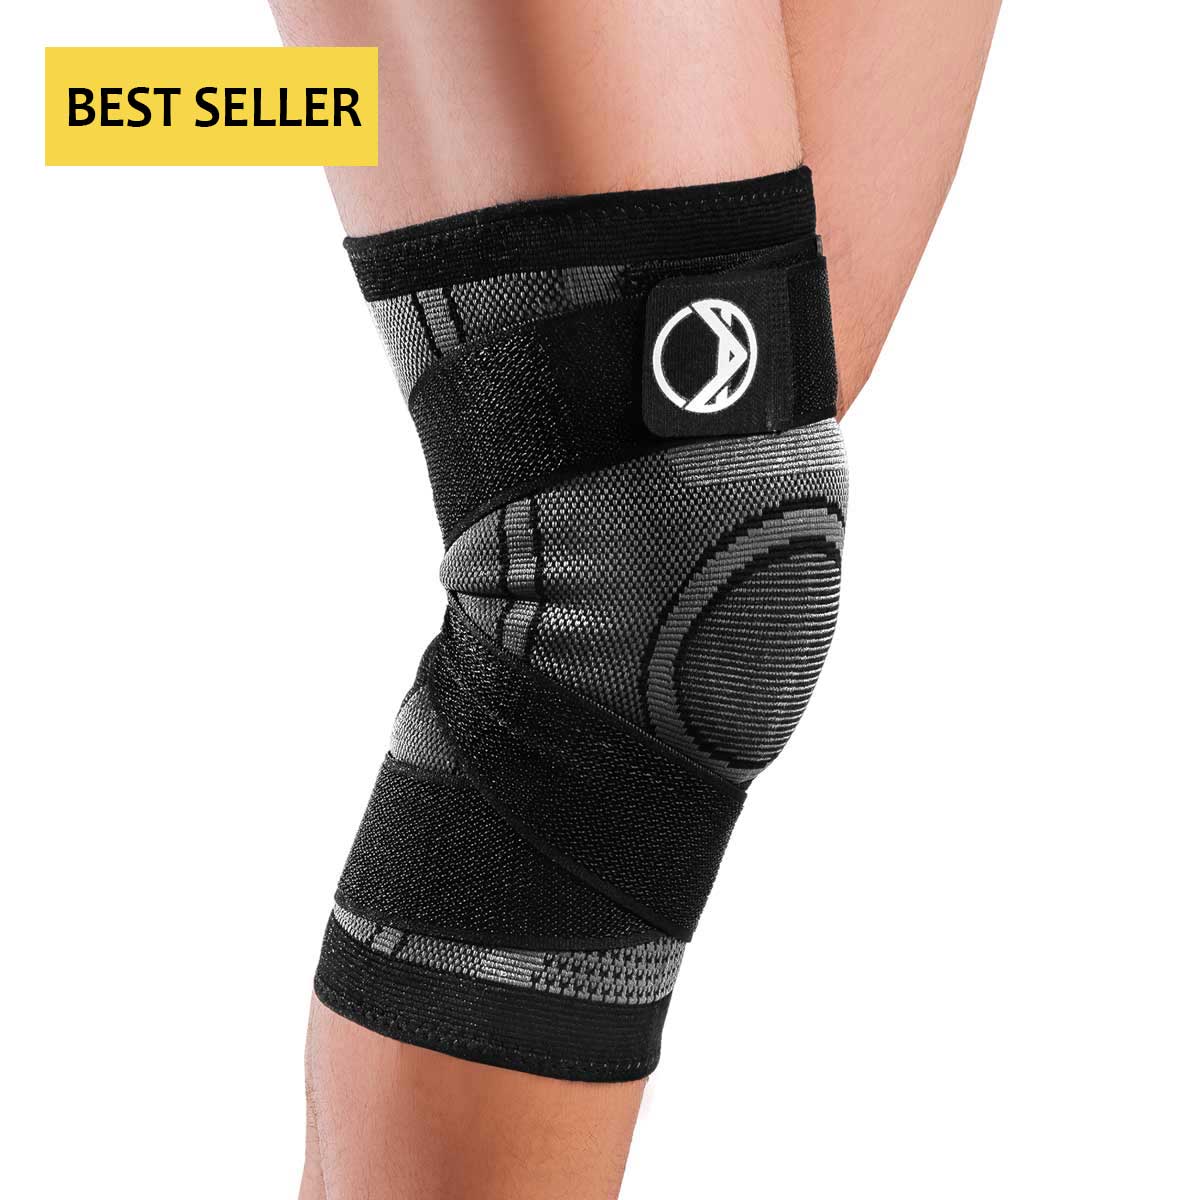 Best Knee Support Brace, Straps And Sleeves In Low Price